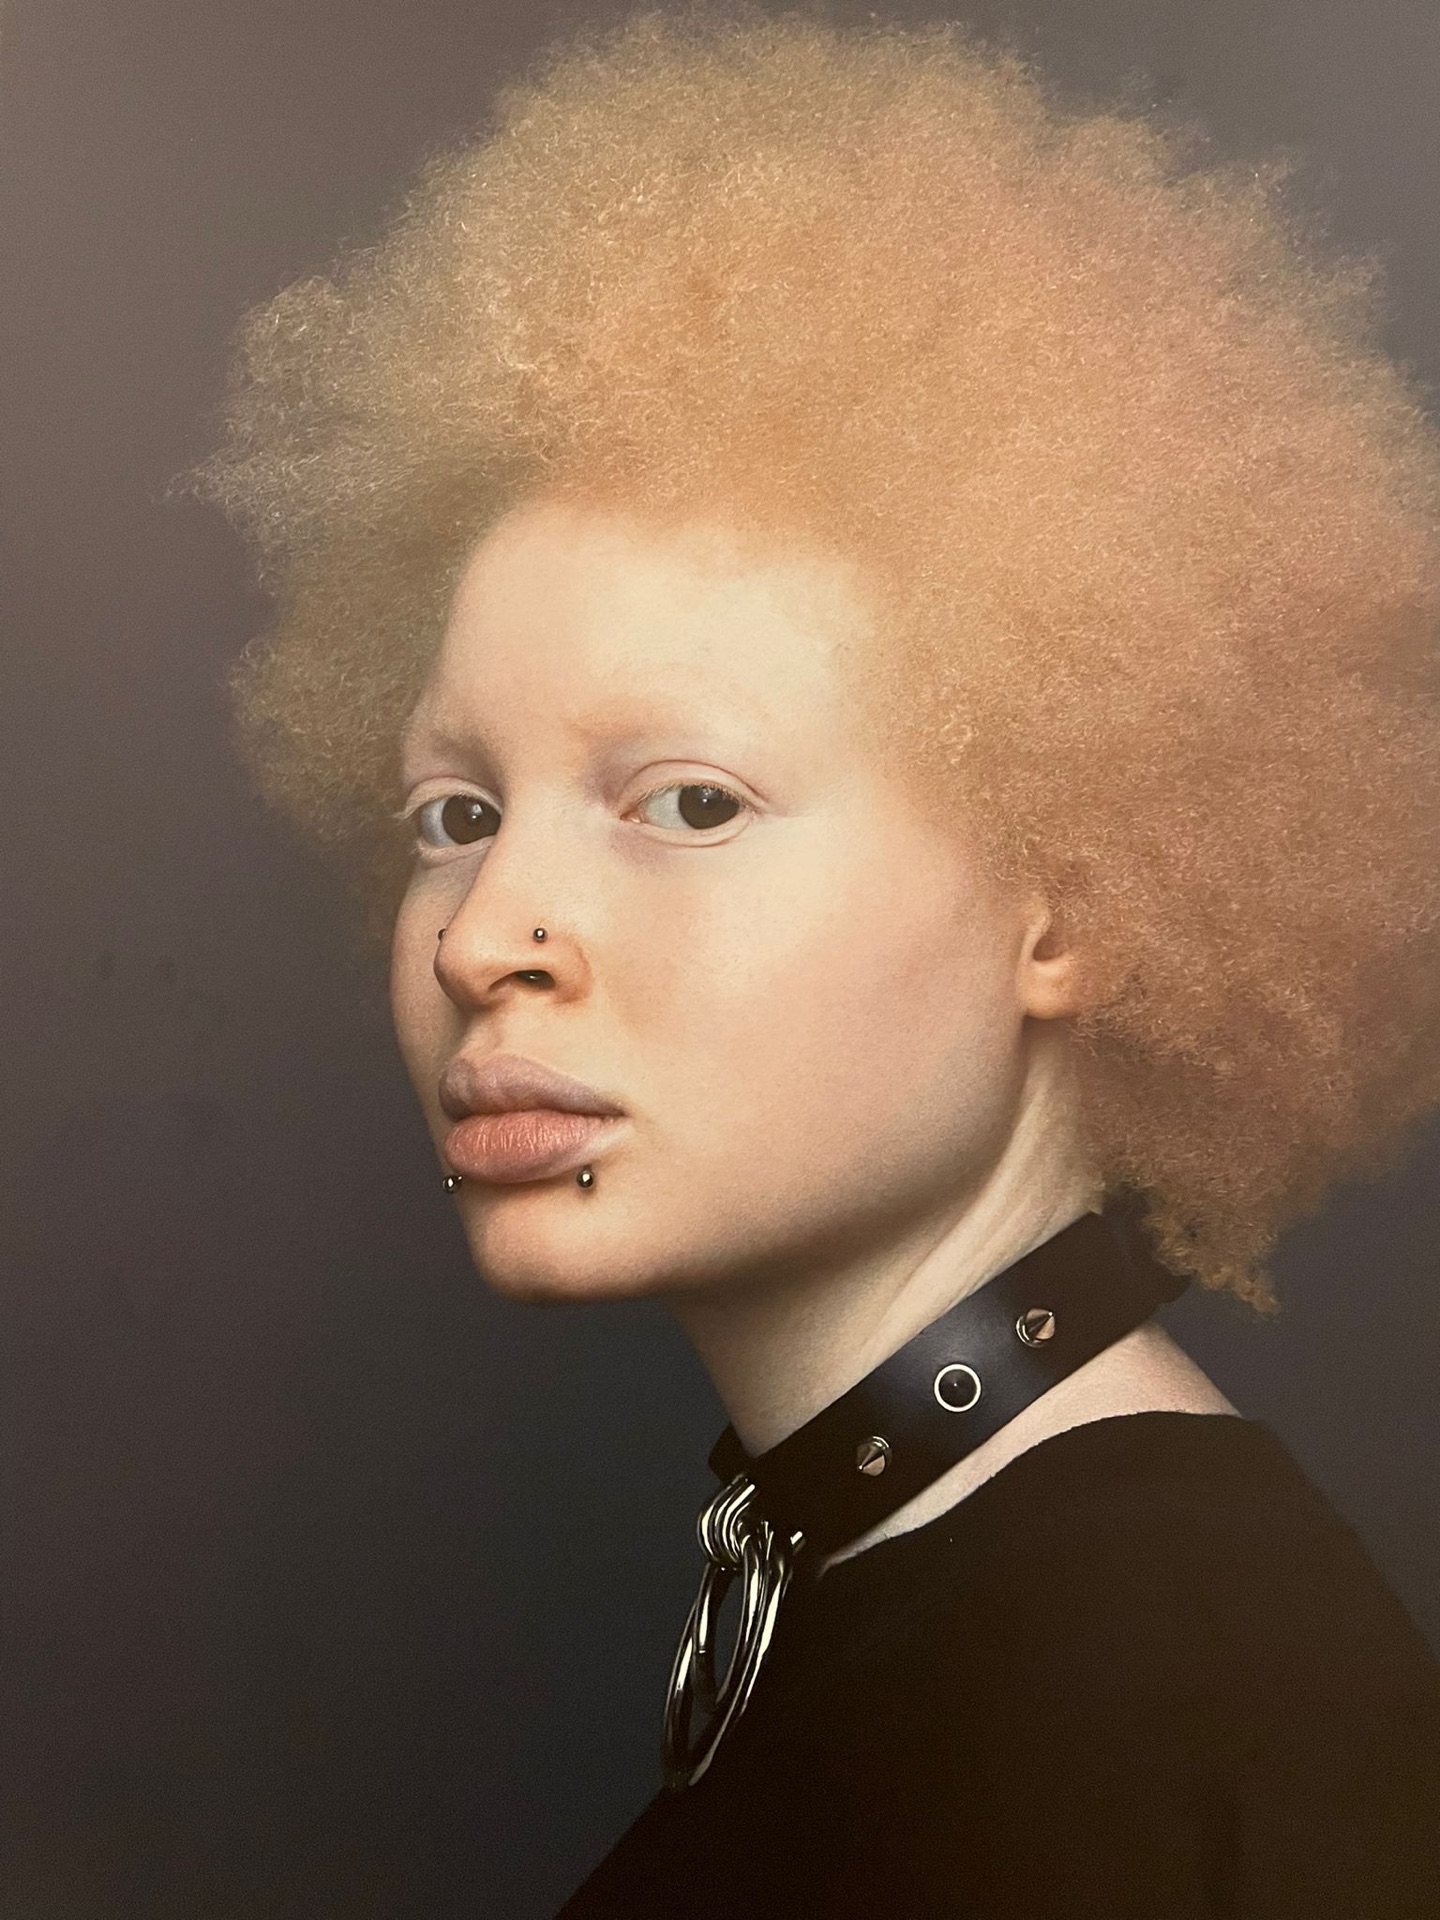 A black women with albinism looks sideways at the camera